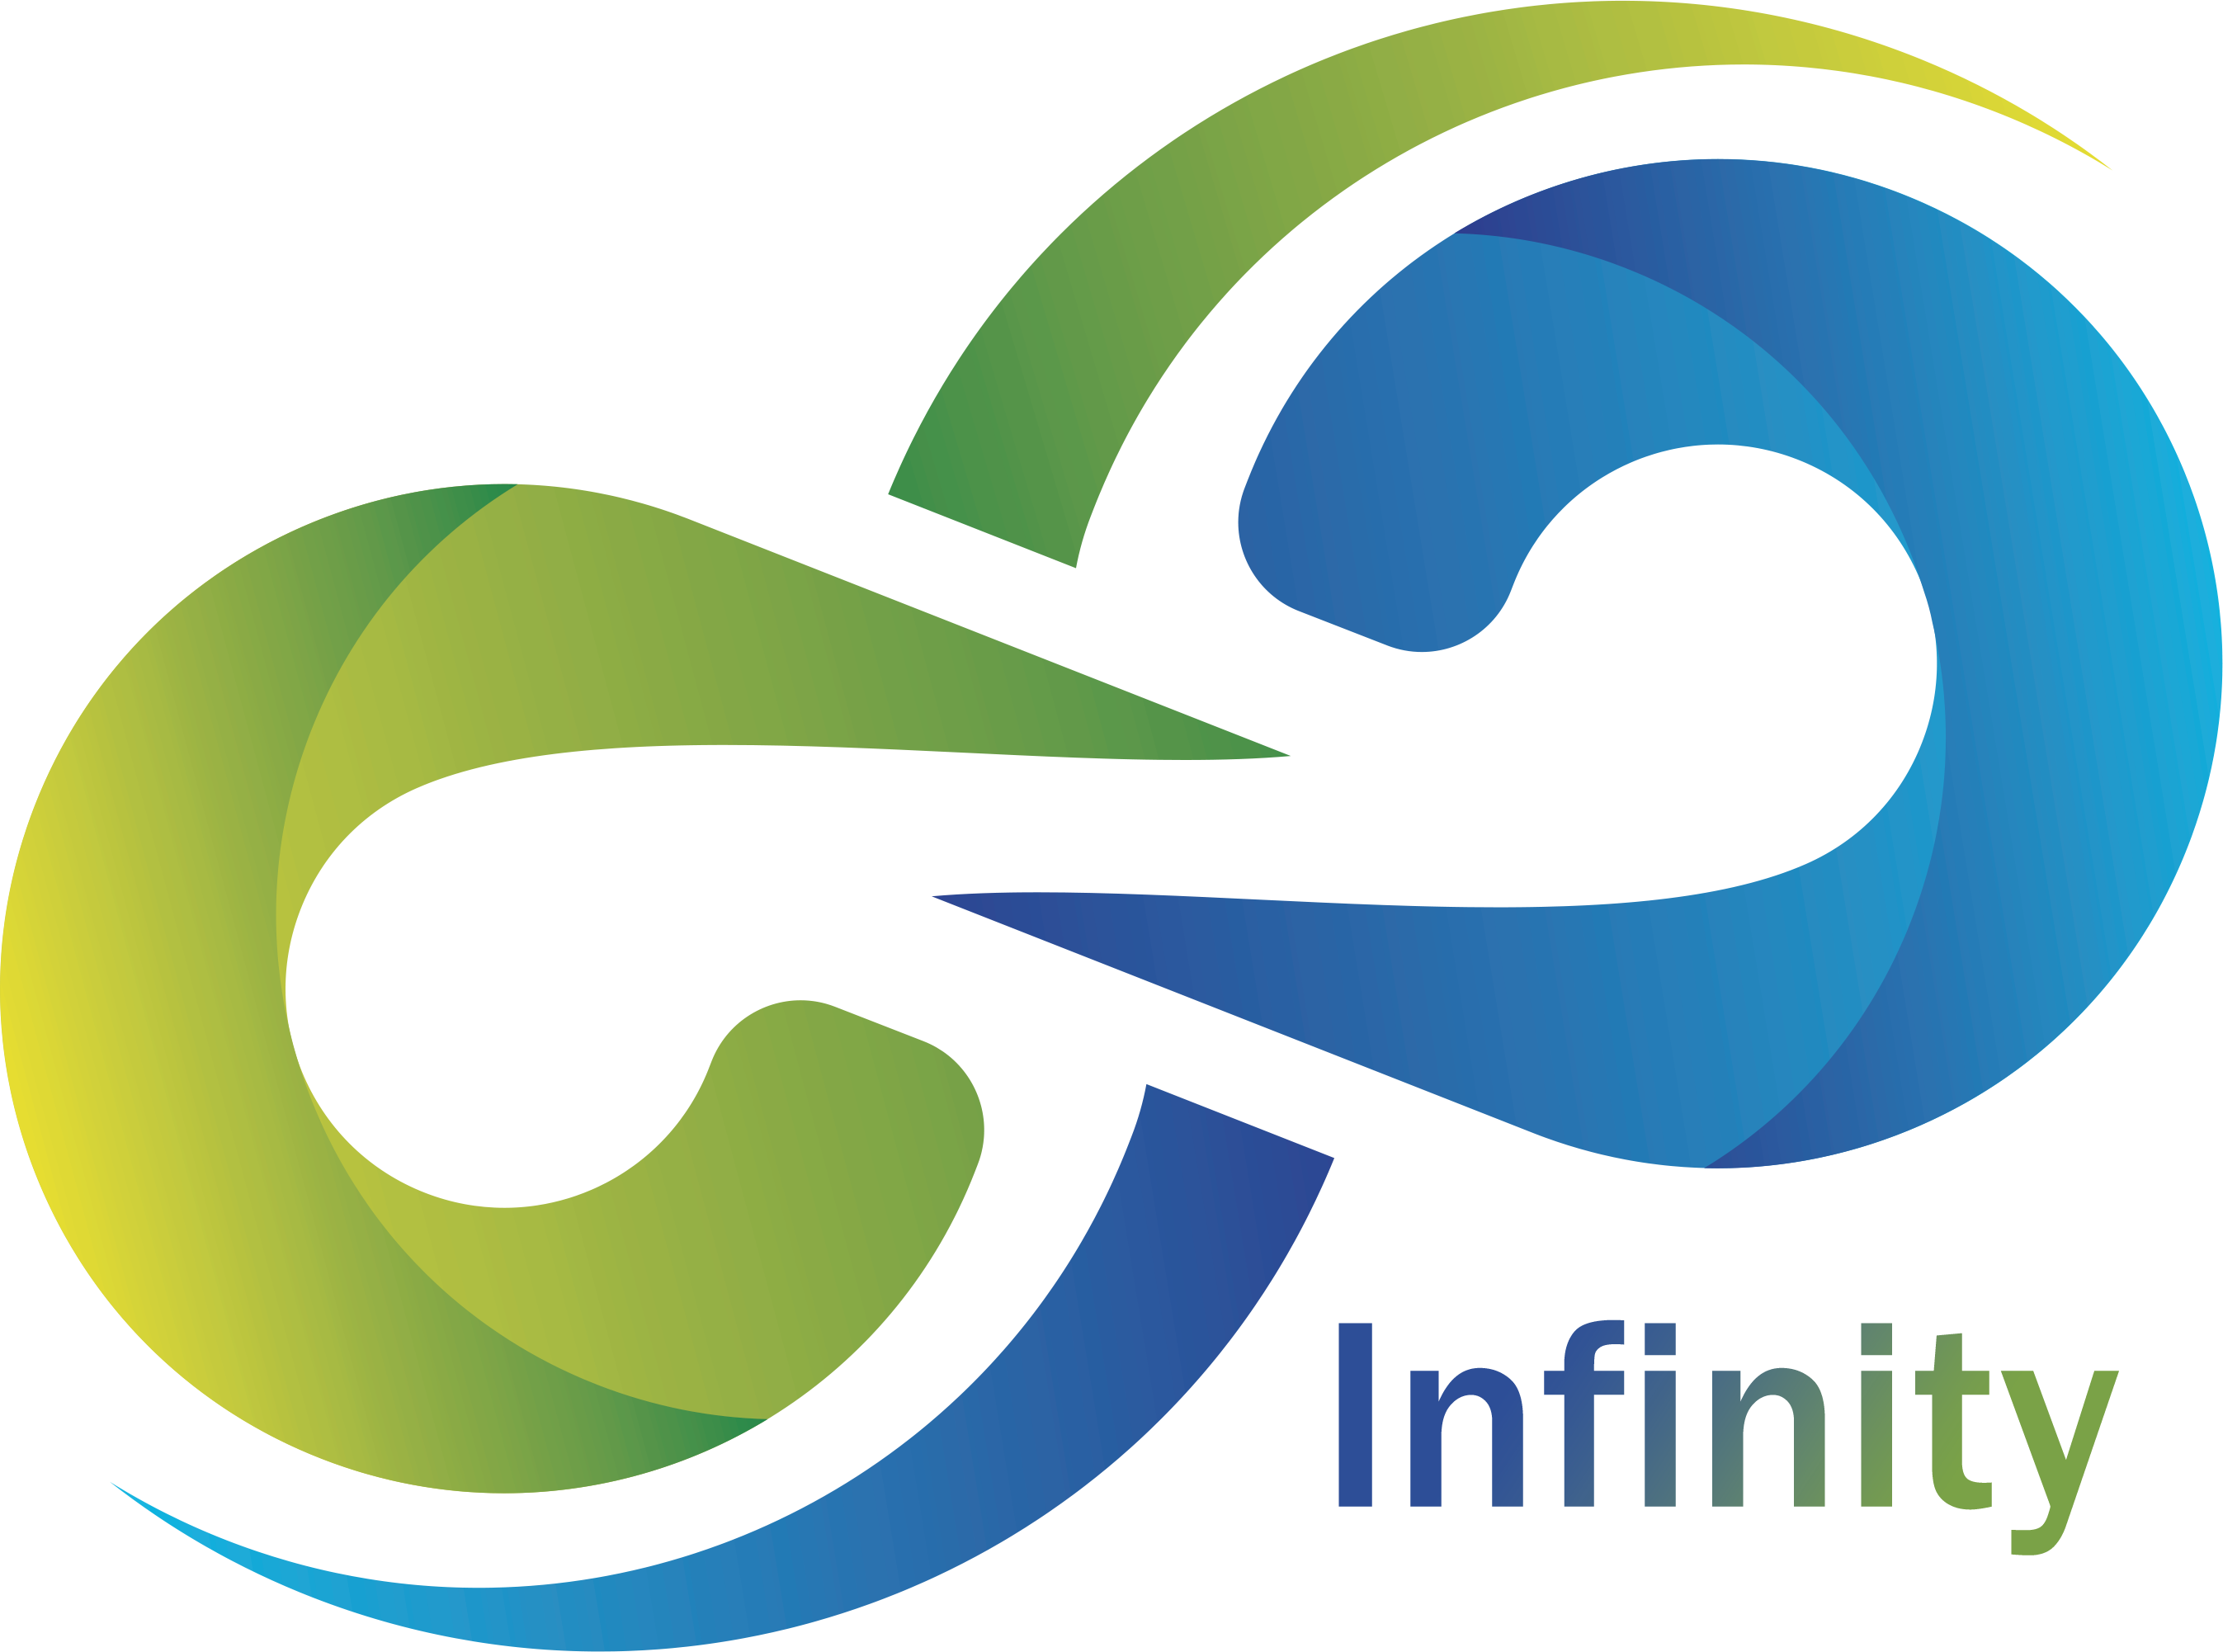 Infinity Solutions